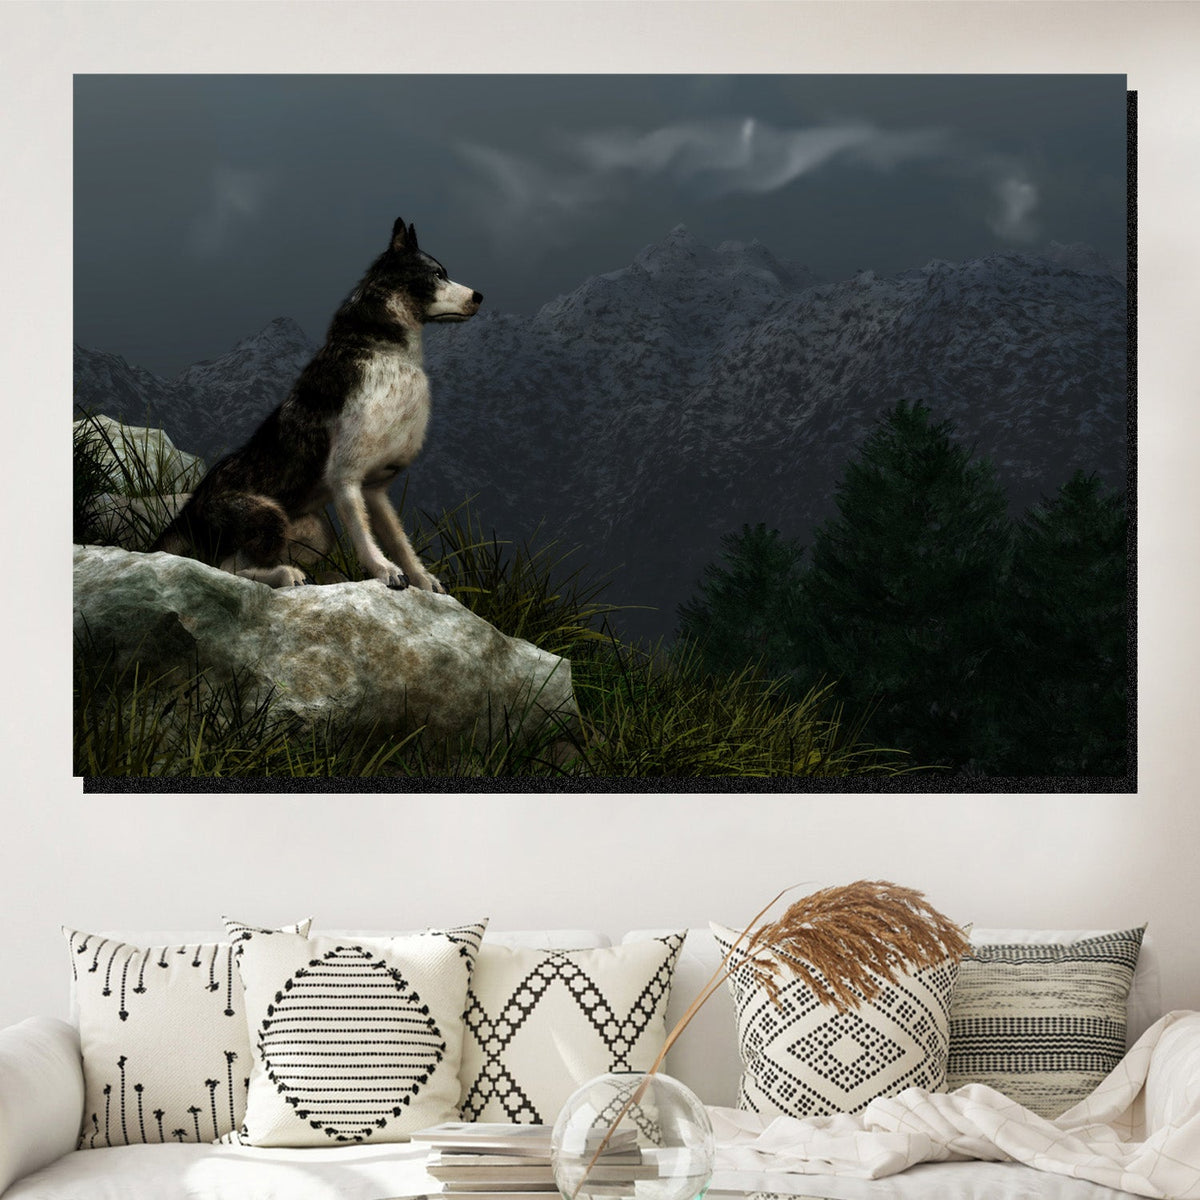 https://cdn.shopify.com/s/files/1/0387/9986/8044/products/SolitaryWolfCanvasArtprintStretched-2.jpg